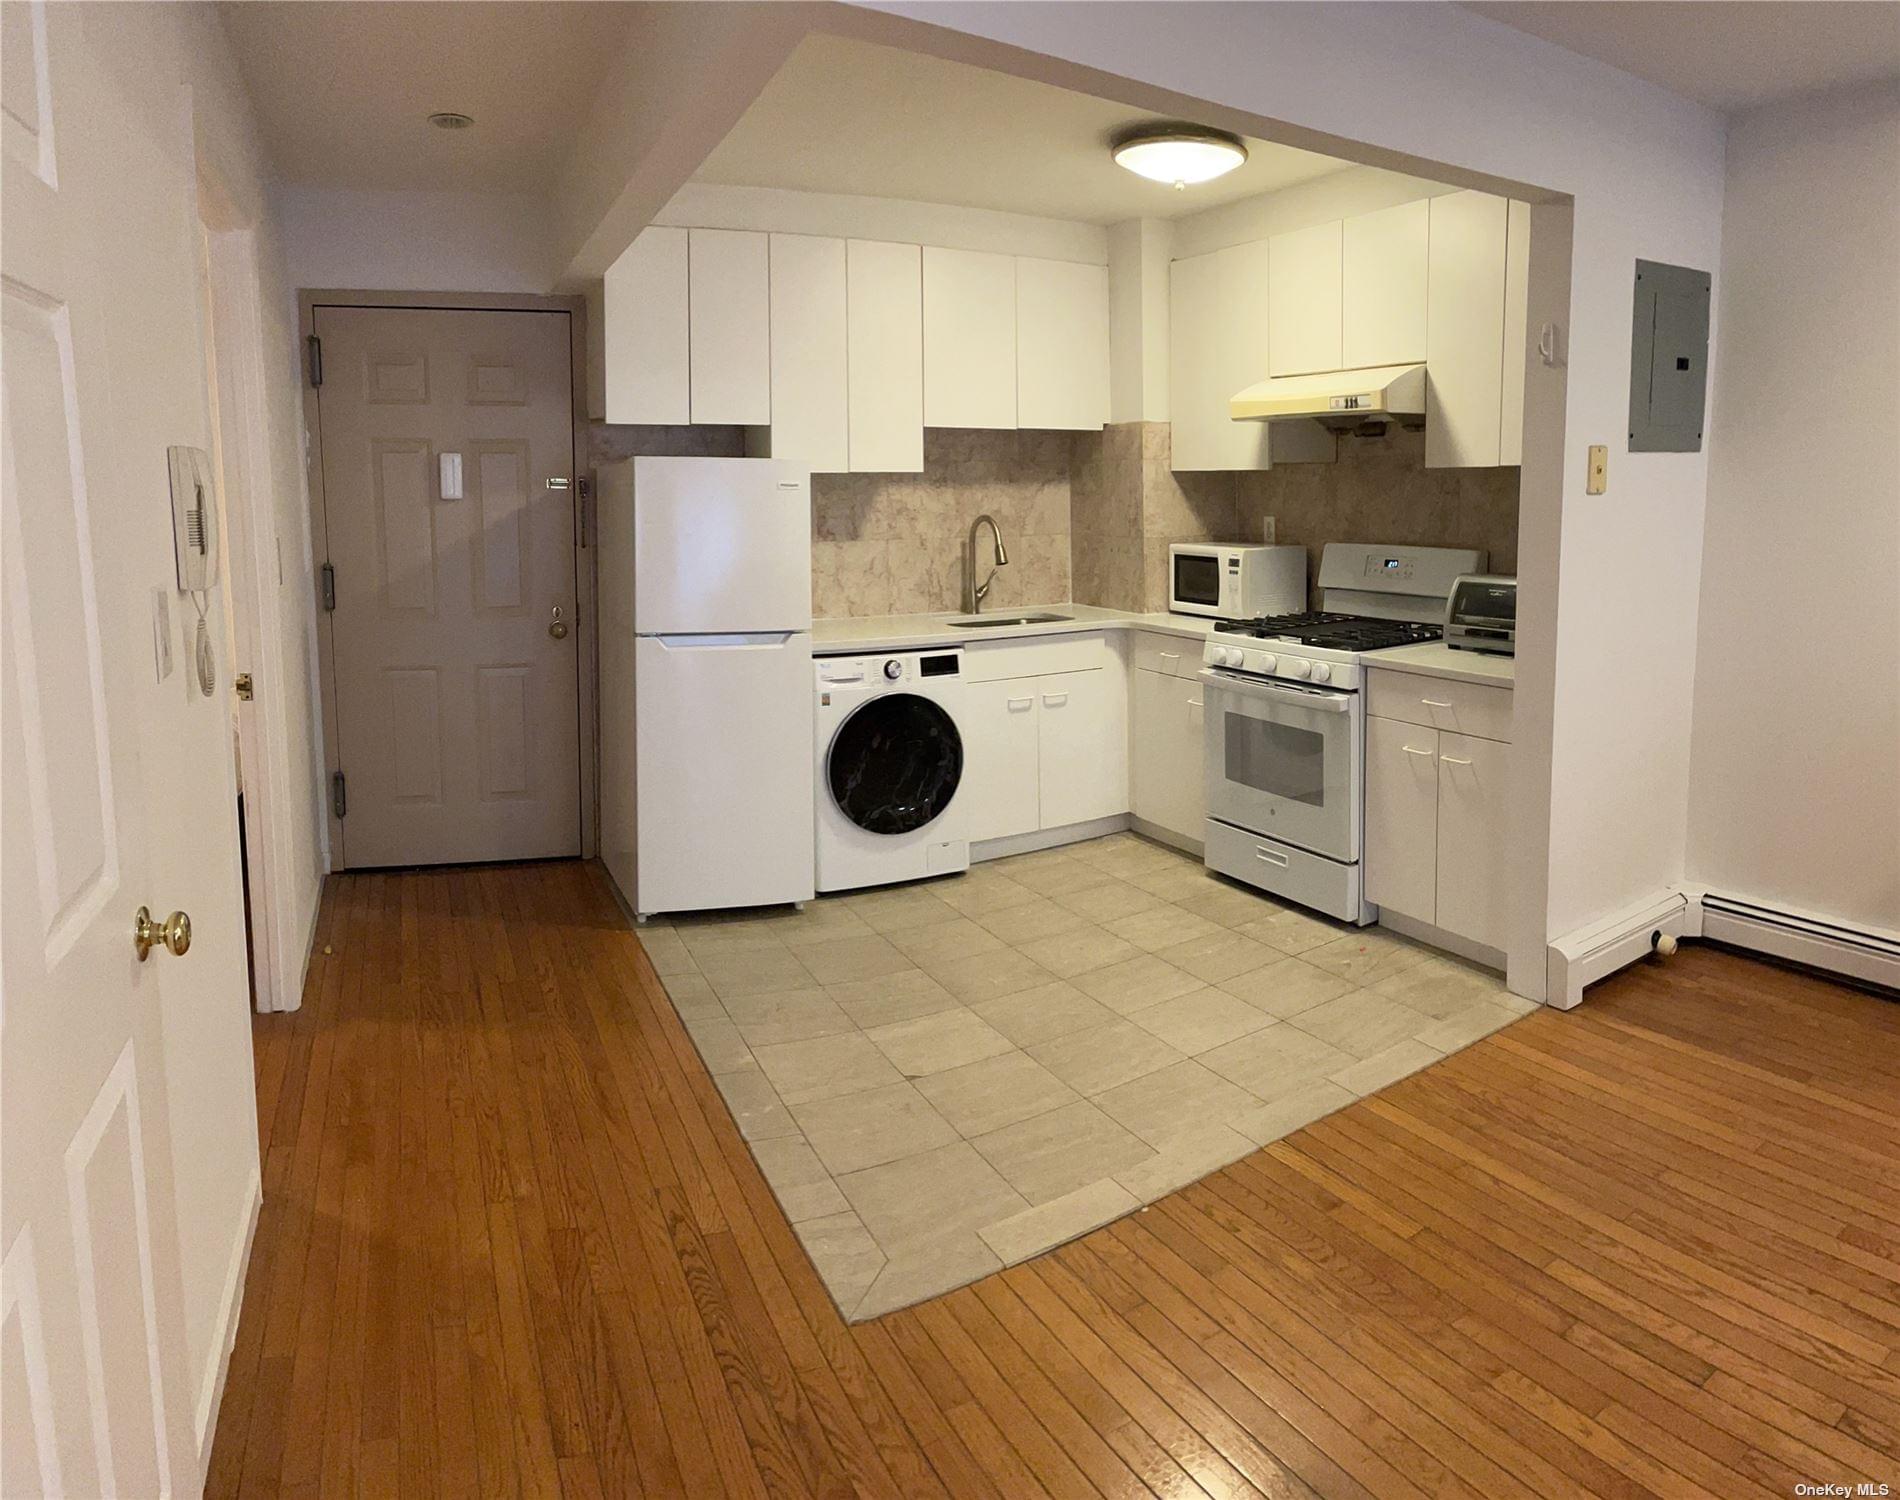 42-31 Colden Street #R6G in Queens, Flushing, NY 11355